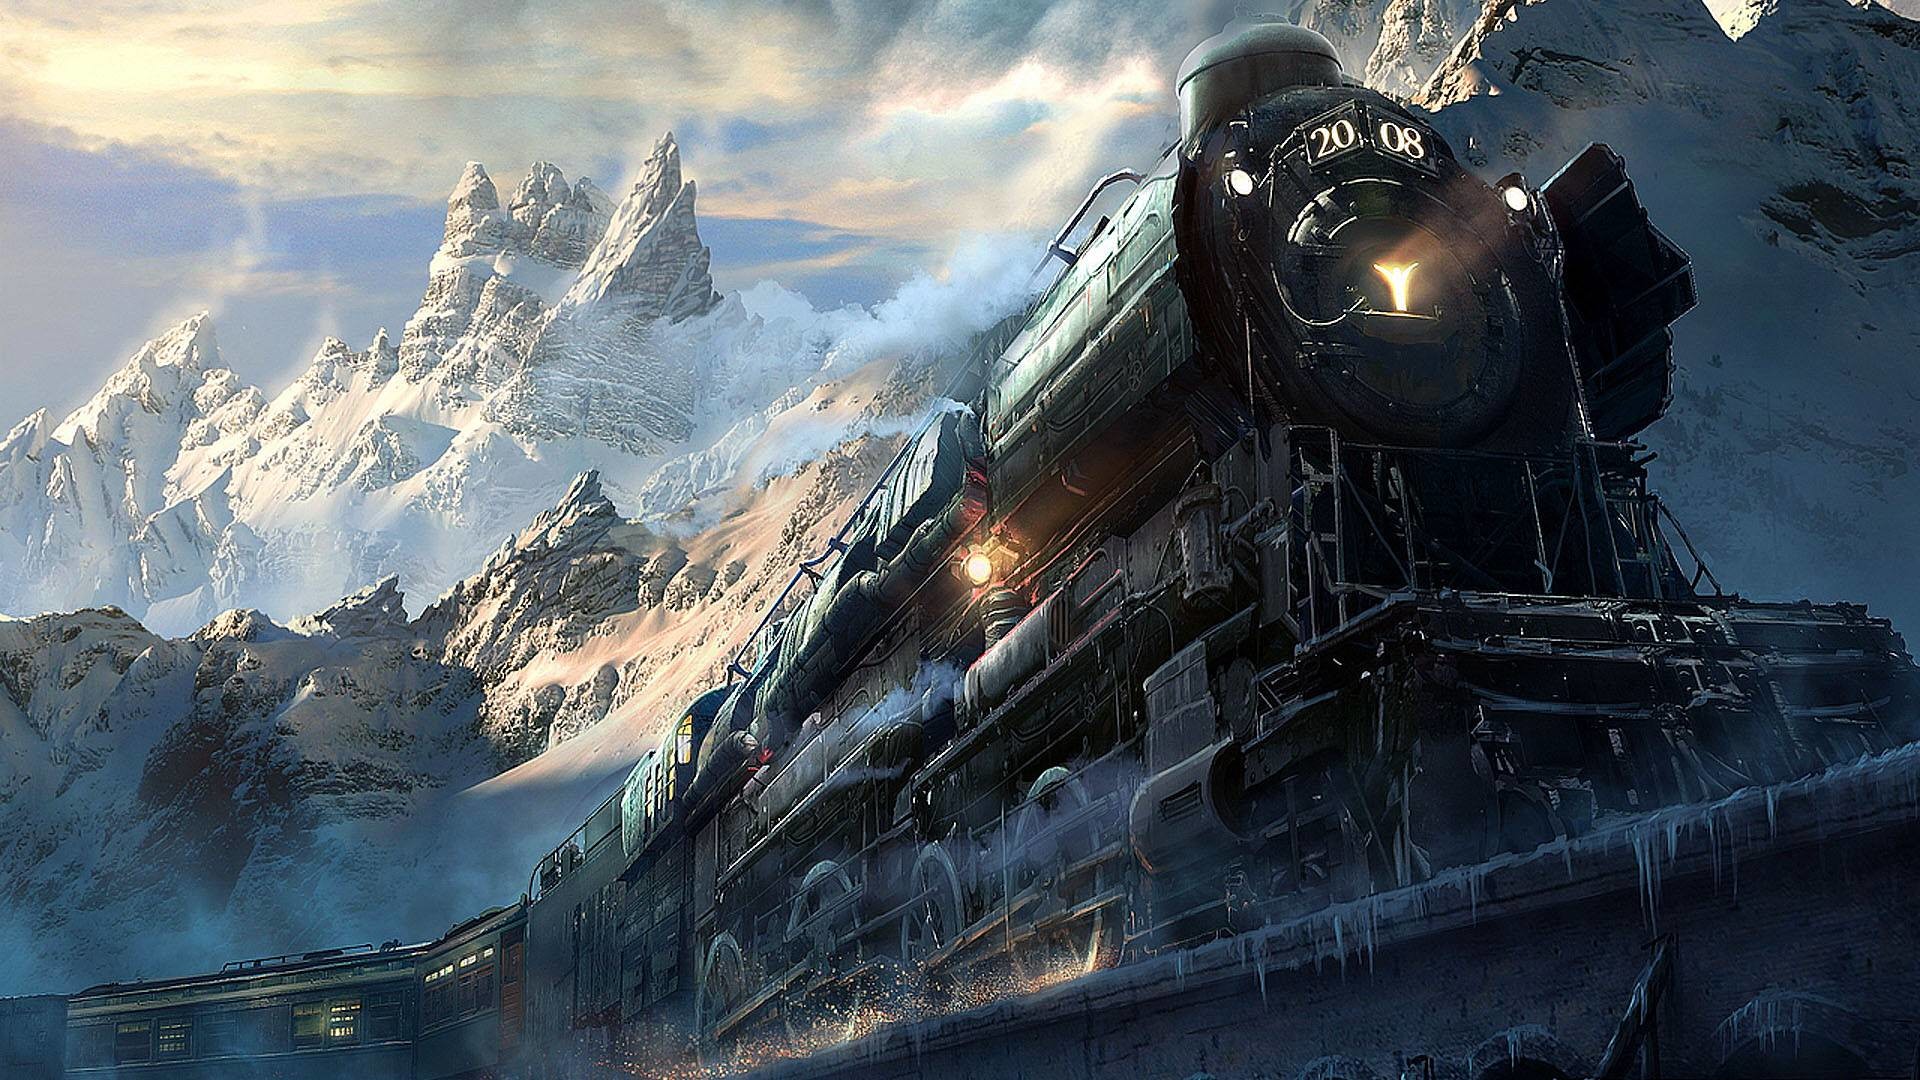 1920x1080 21+ Train Wallpapers, Backgrounds, Images | FreeCreatives